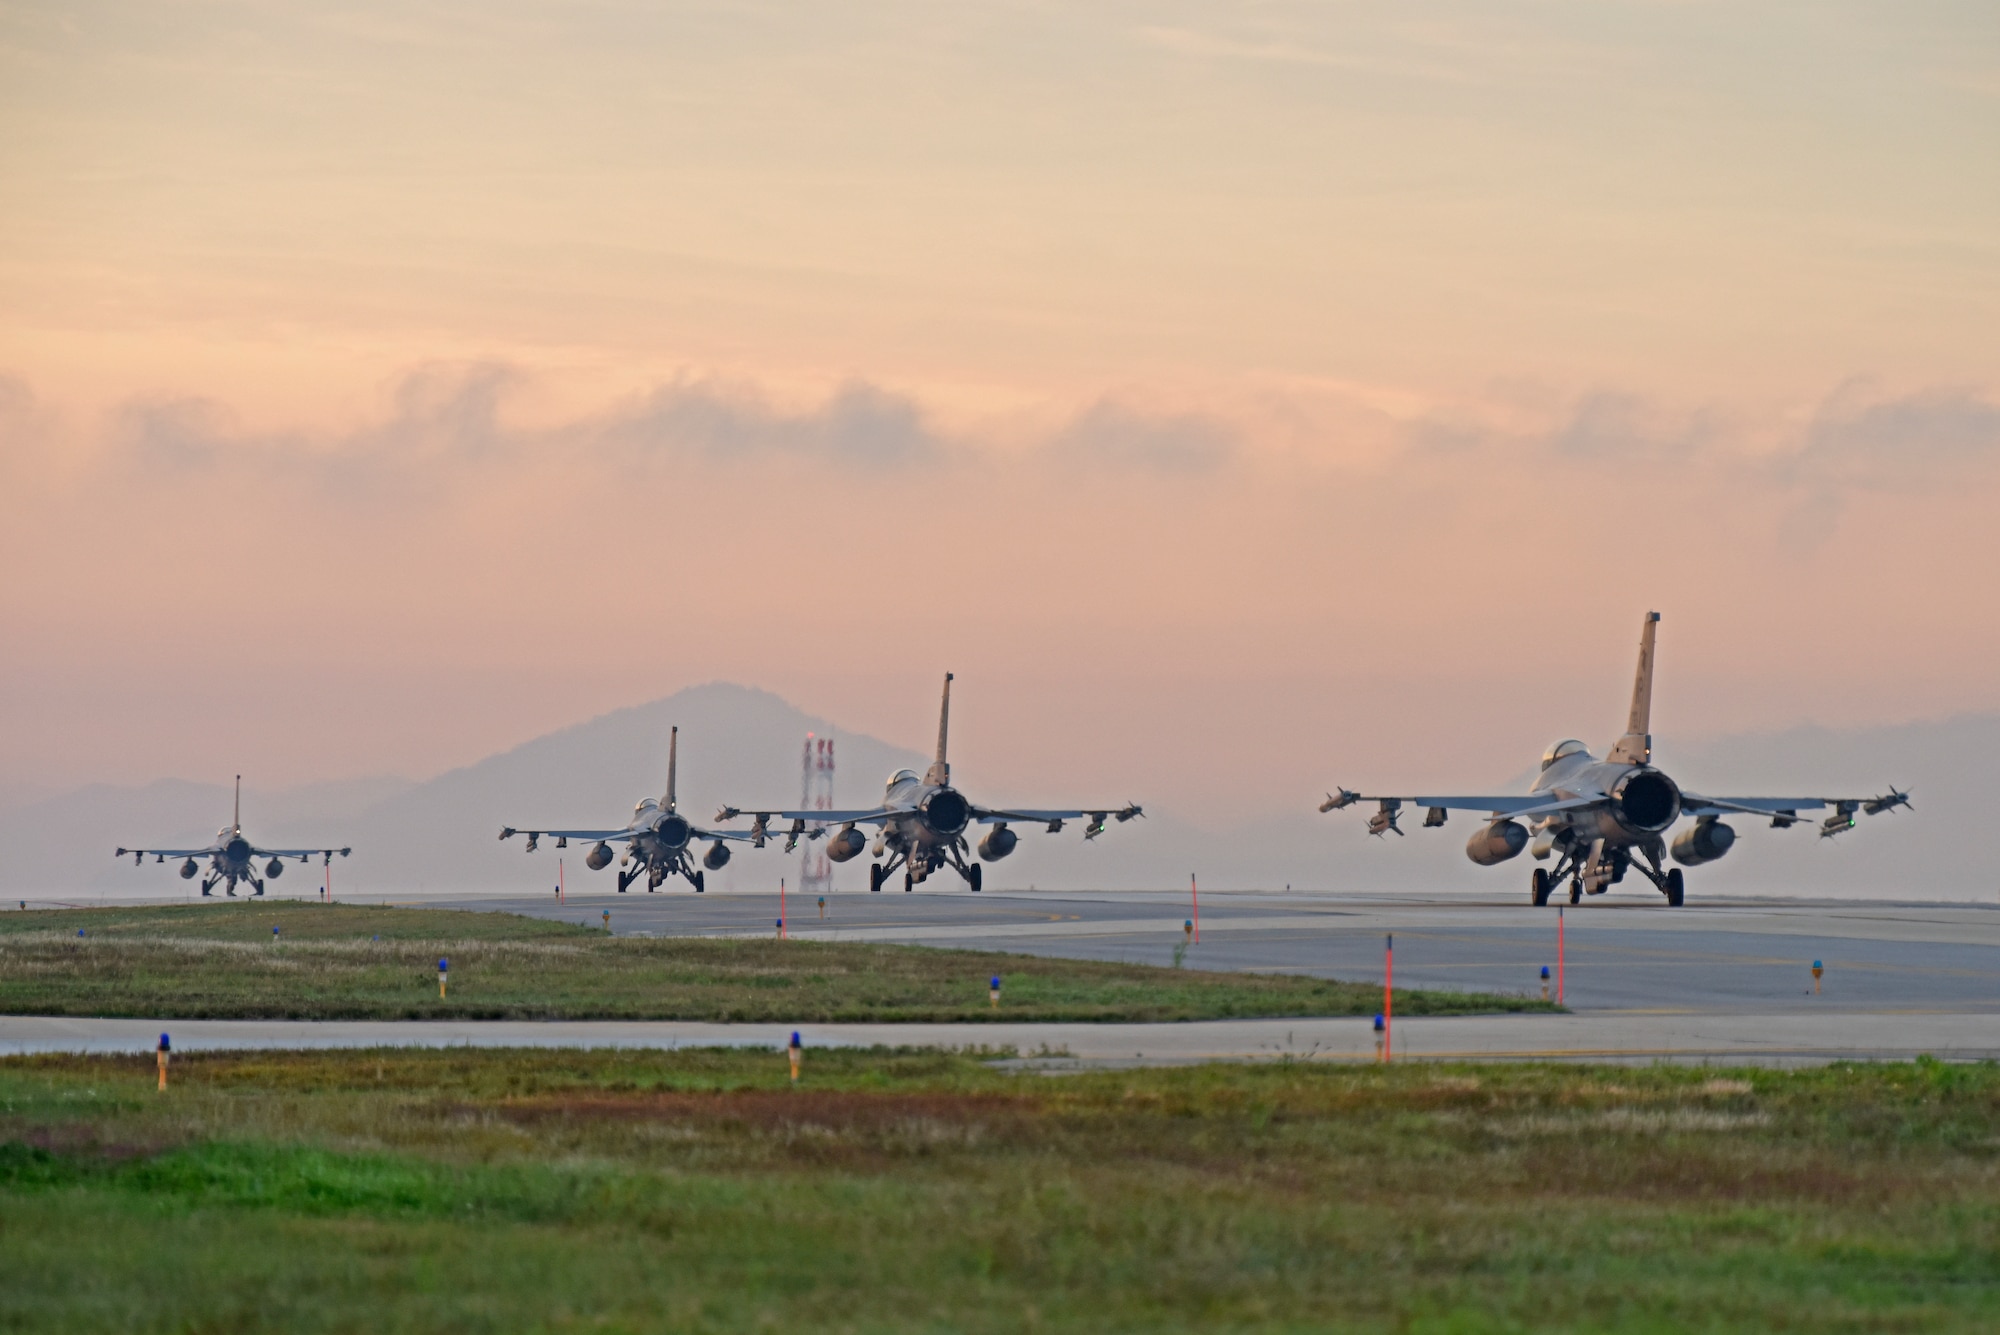 U.S. Air Force F-16 Fighting Falcons assigned to the 8th Fighter Wing prepare to take-off for a routine training flight at Kunsan Air Base, Republic of Korea, Oct. 10, 2019. The 8th FW is home to two fighter squadrons, the 35th Fight Squadron “Pantons” and 80th FS “Juvats.” They perform air and space control roles including counter air, strategic attack, interdiction and close-air support missions. (U.S. Air Force photo by Staff Sgt. Mackenzie Mendez)